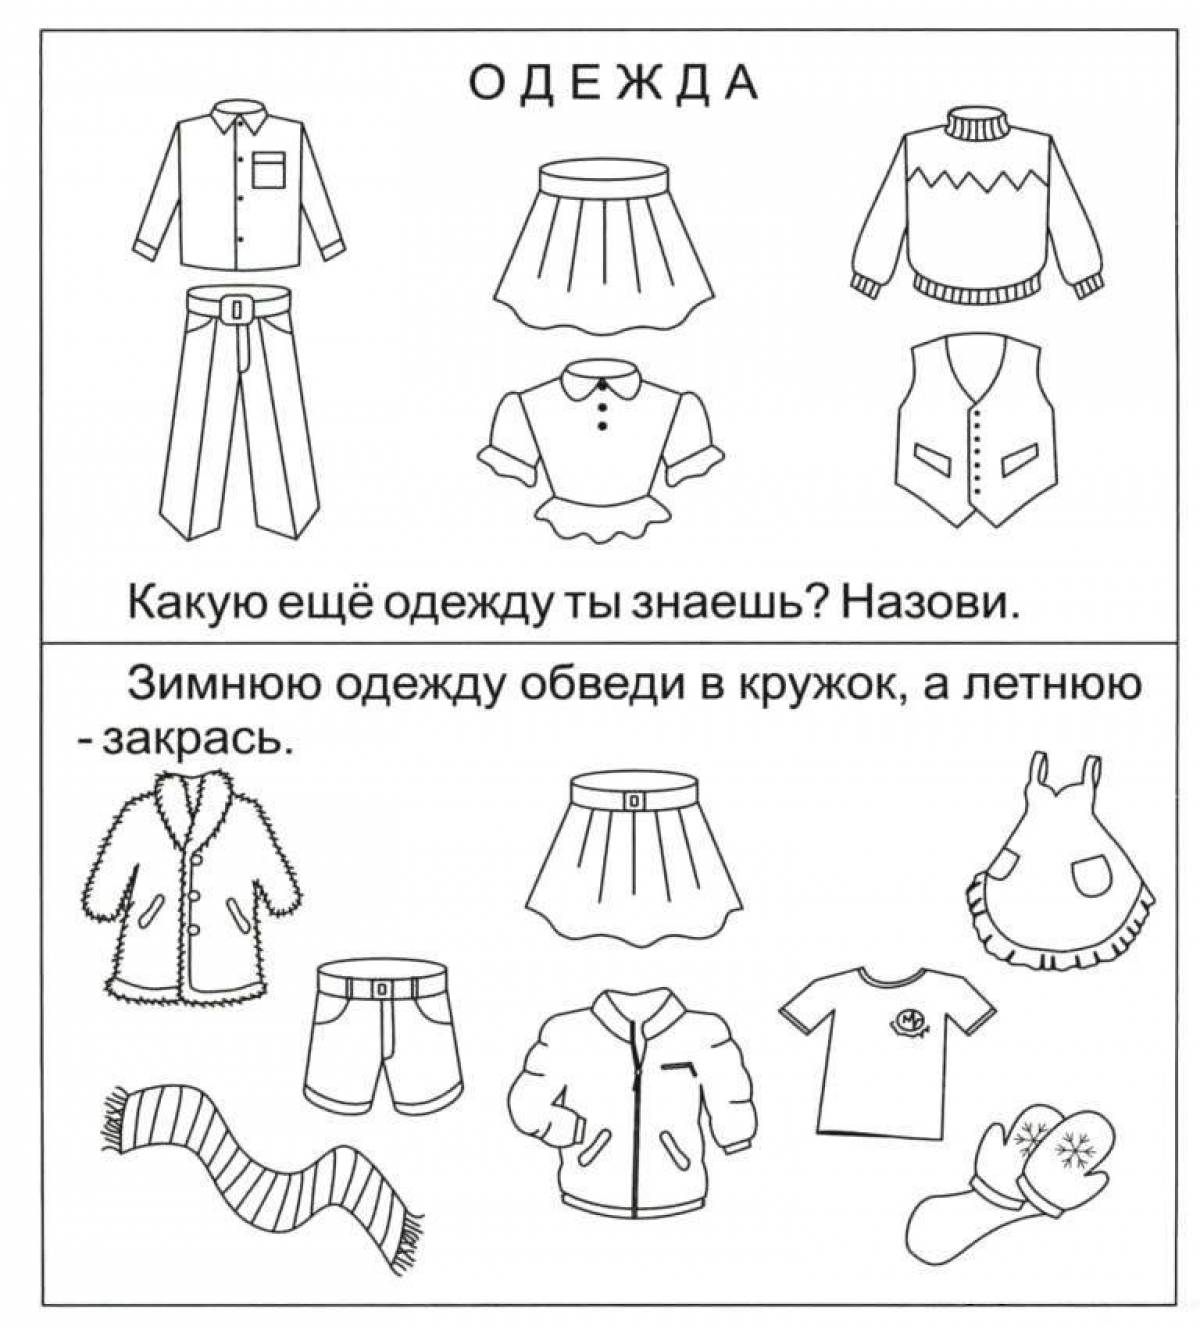 Creative clothing coloring page for 5-6 year olds